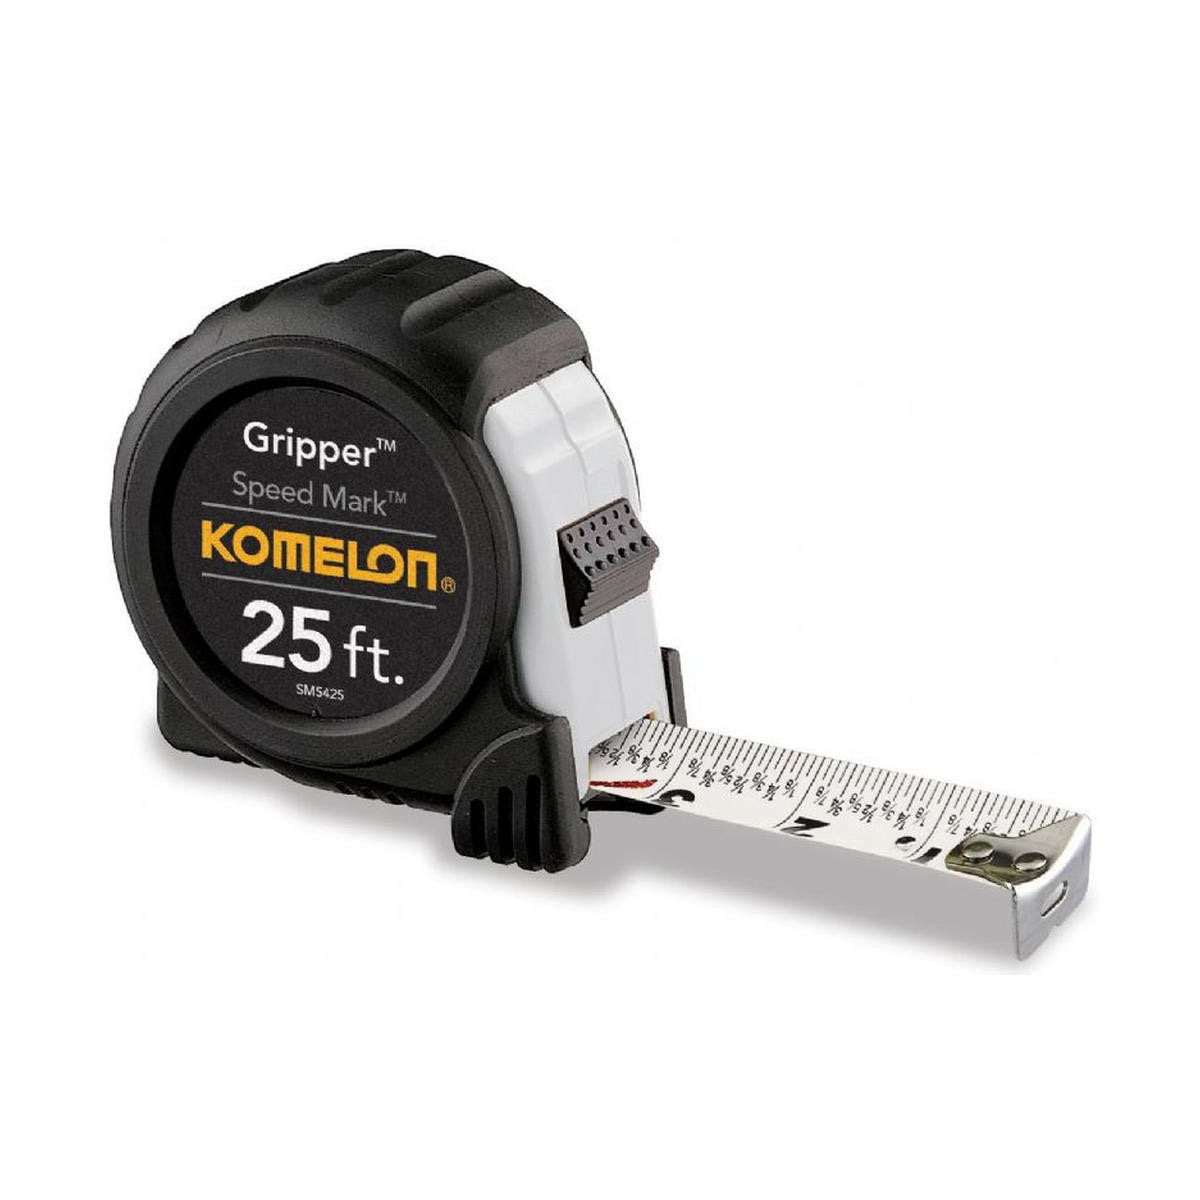 Komelon Gripper Speed Mark tape measure has a rubber coating on the case and white blade with fractions on the bottom edge.